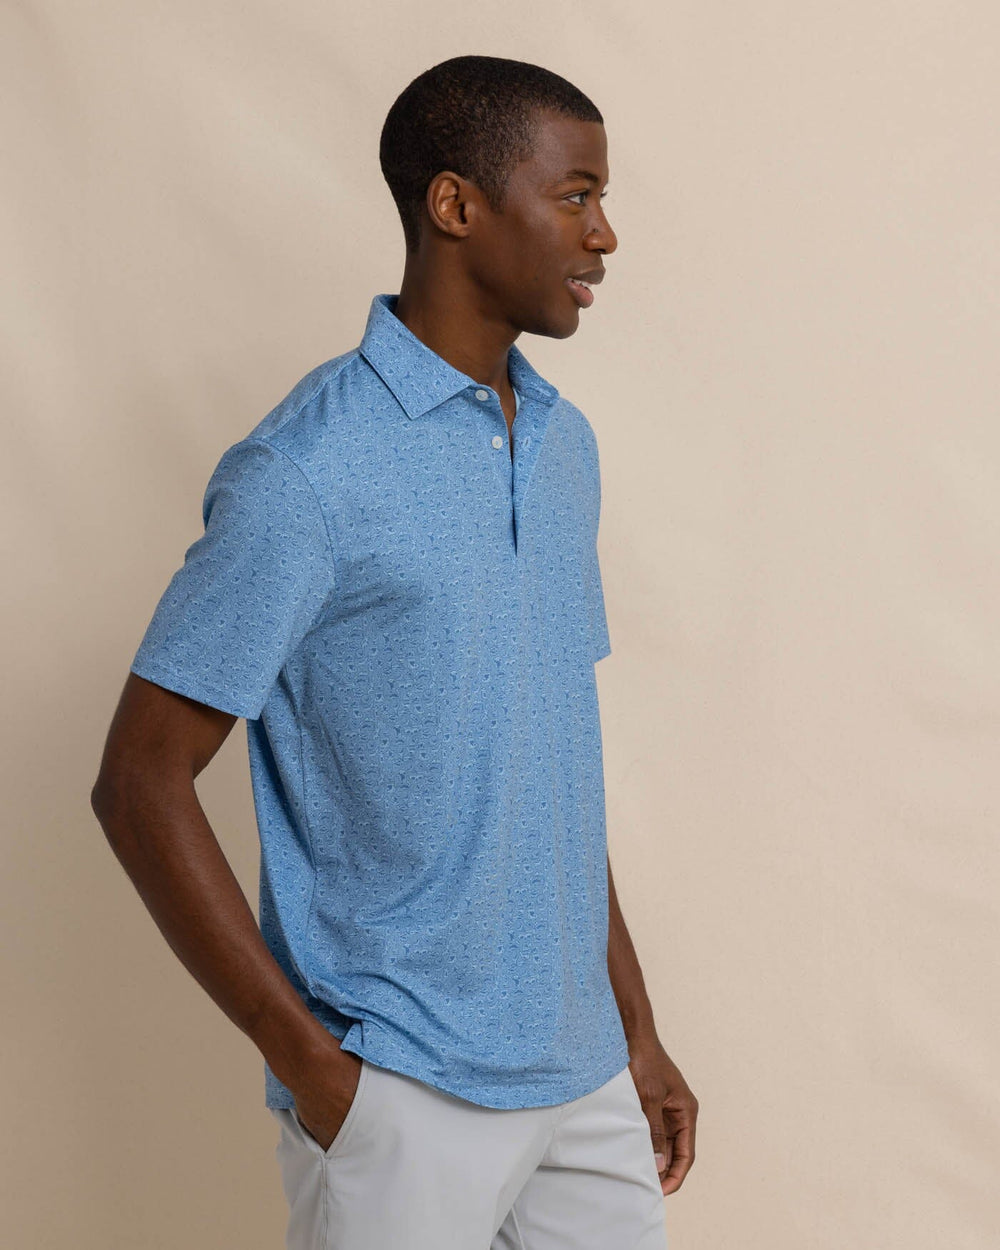 The front view of the Southern Tide Driver Let's Go Clubbing Printed Polo by Southern Tide - Coronet Blue